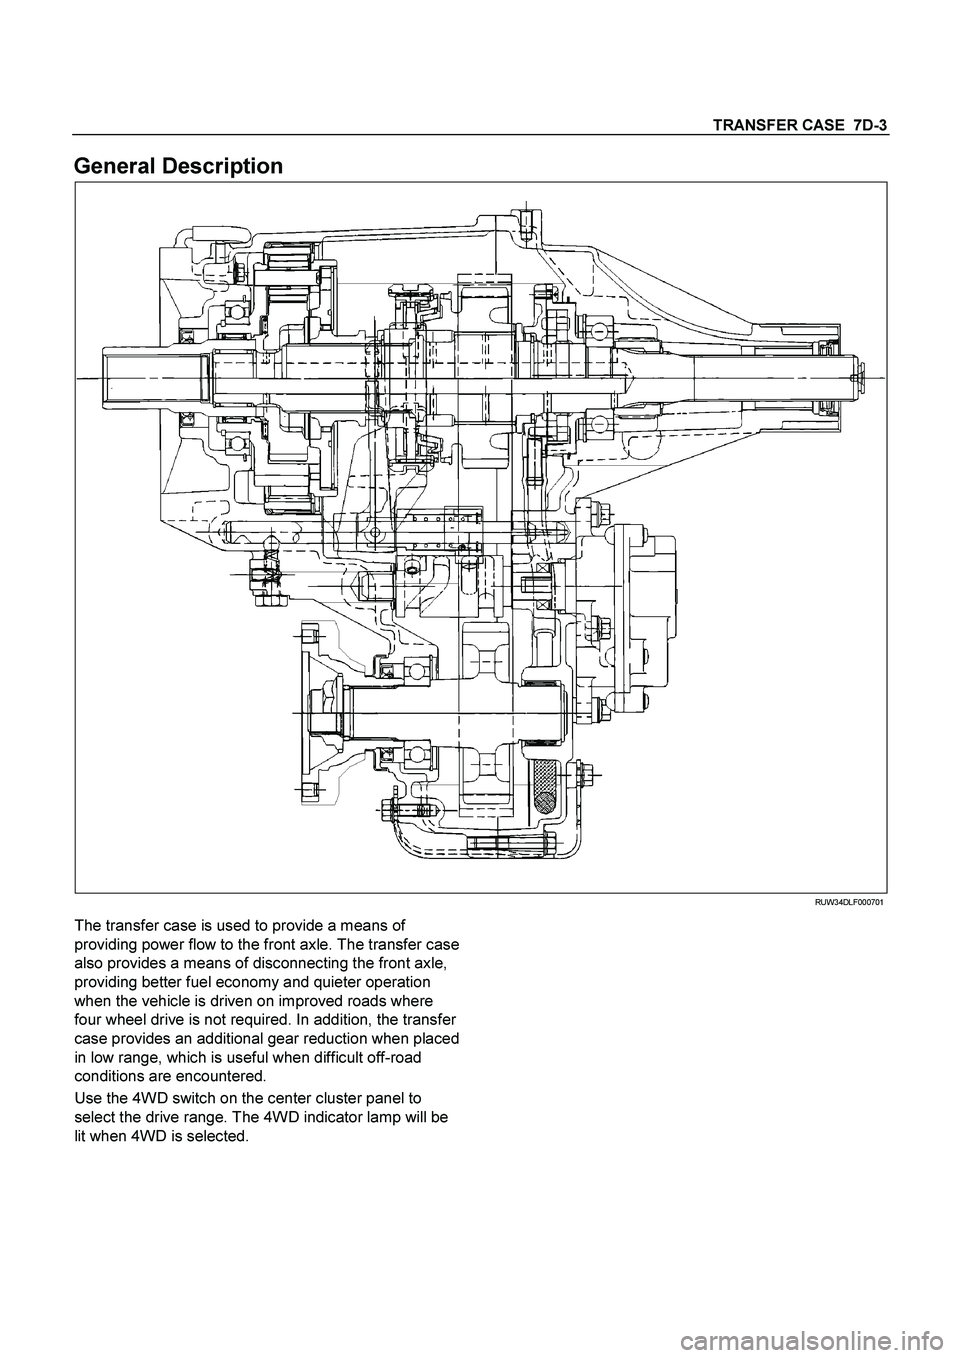 ISUZU TF SERIES 2004  Workshop Manual TRANSFER CASE  7D-3
 
General Description 
  
 RUW34DLF000701 
The transfer case is used to provide a means of 
providing power flow to the front axle. The transfer case 
also provides a means of disc